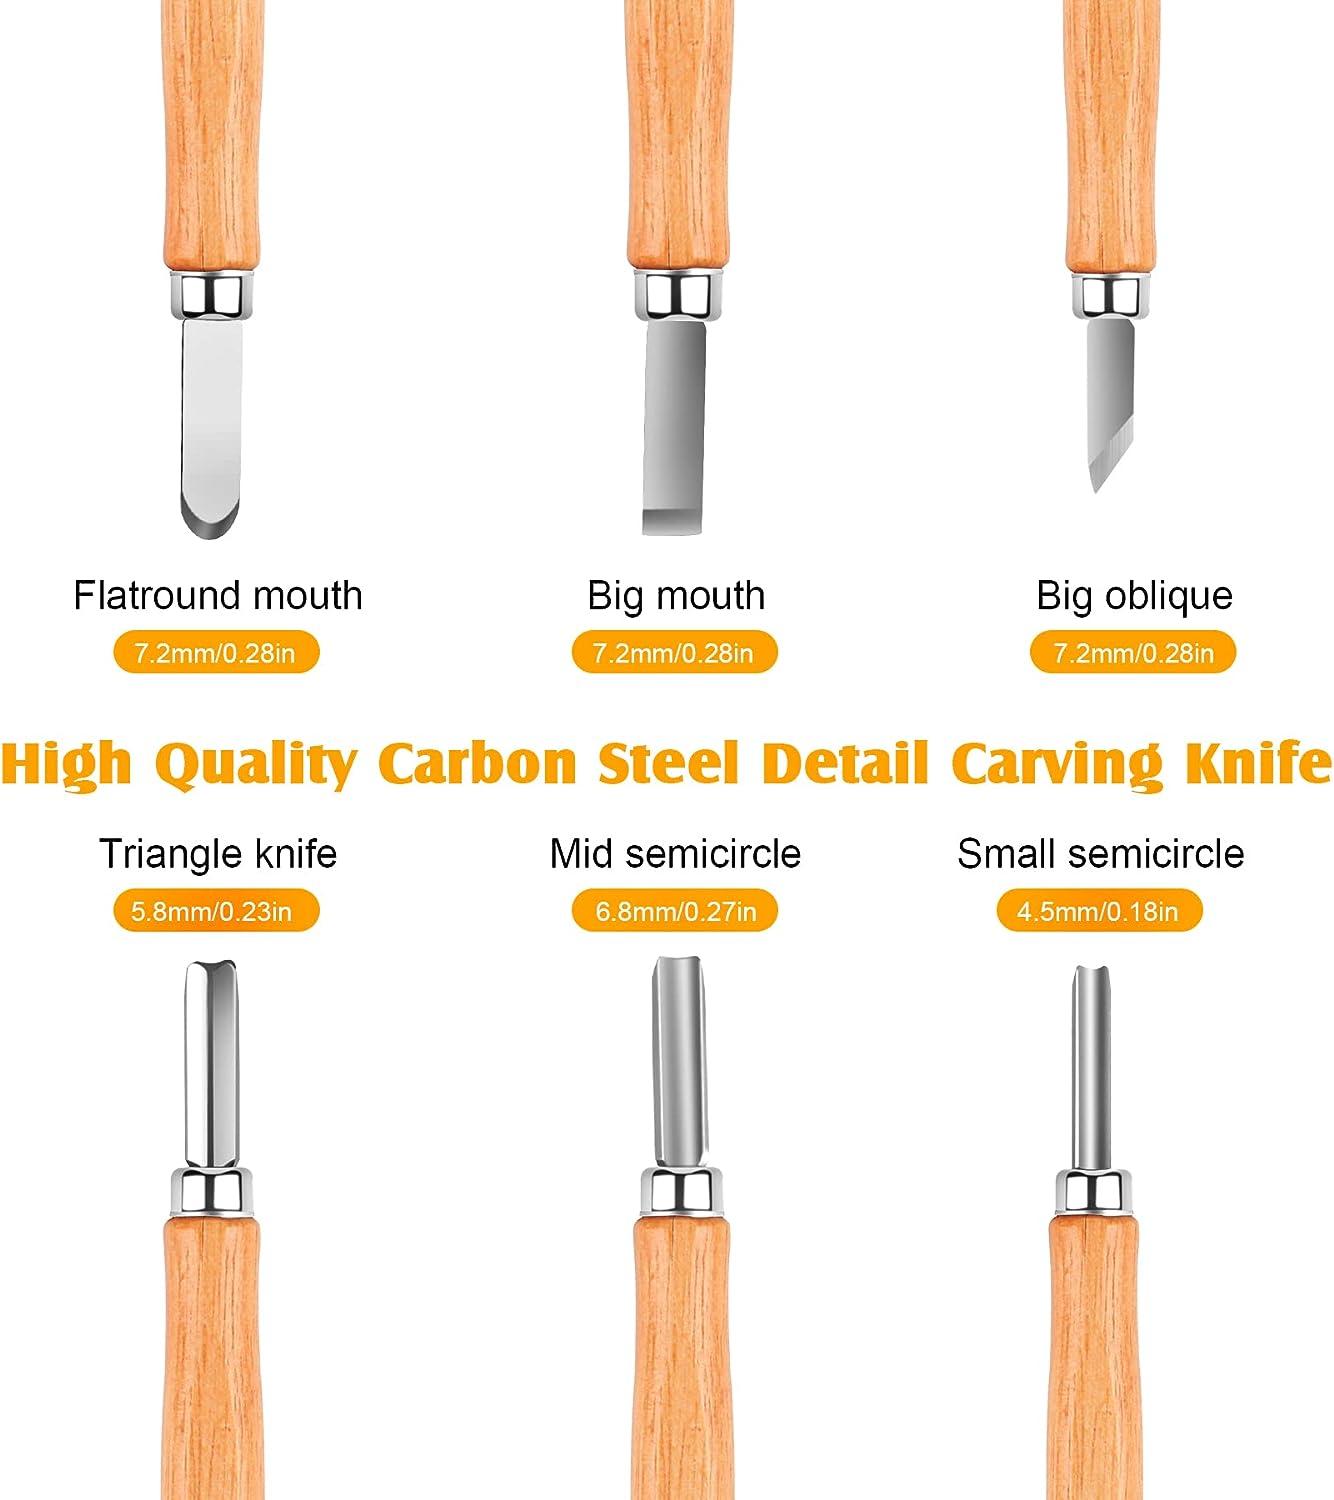  Wood Carving Tools Set, Wood Whittling Kit for Beginners Kids  and Adults - Wood Carving Kit with Detail Wood Carving Knife, Whittling  Knife, Wood Chisel Knife, Gloves, Carving Knife Sharpener 